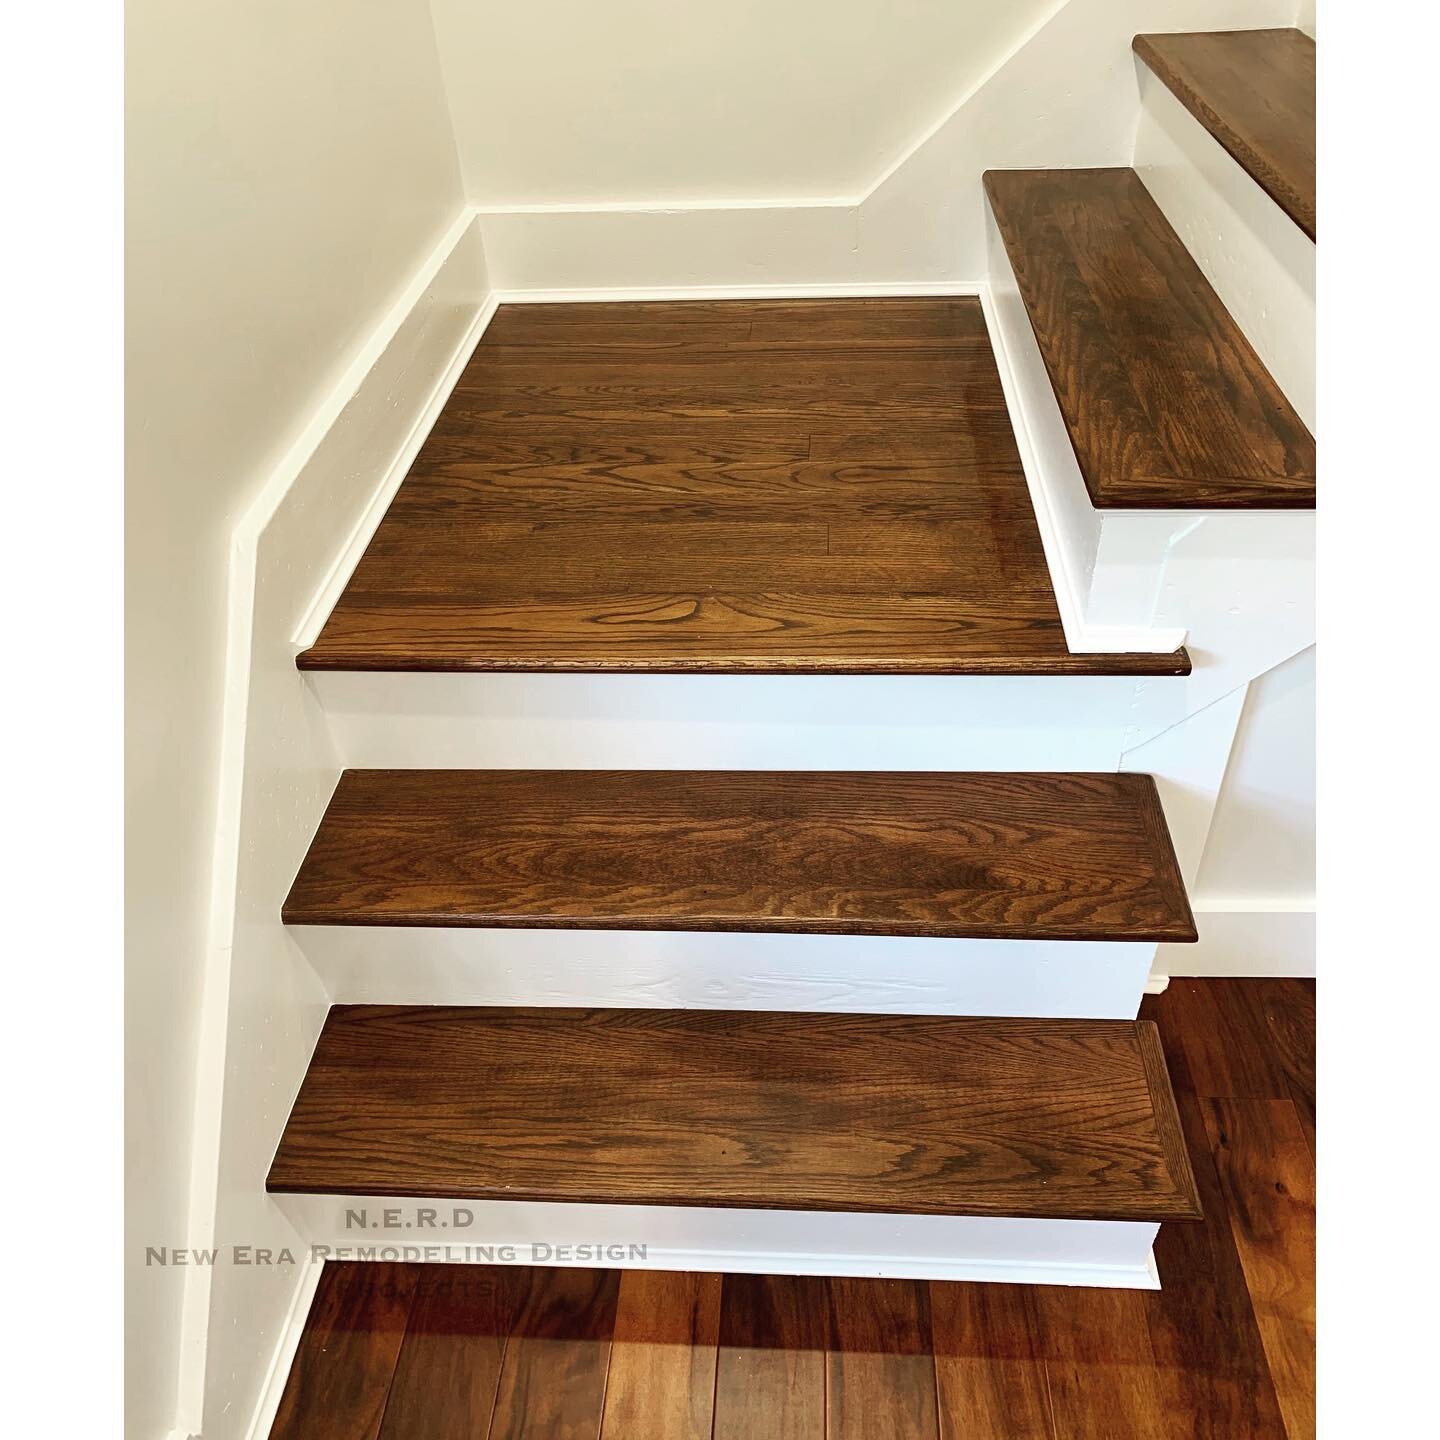 Interior Stair Reface. #TeamNeRdProjects #interiorremodeling #homeimprovement #builder #houzz #HGTV #brooklyncontractor #interiordesign #remodeling #spaceplanning #architecturedesign #dyi #architecture #construction  #homes #tiles #nyc #flooring #bro